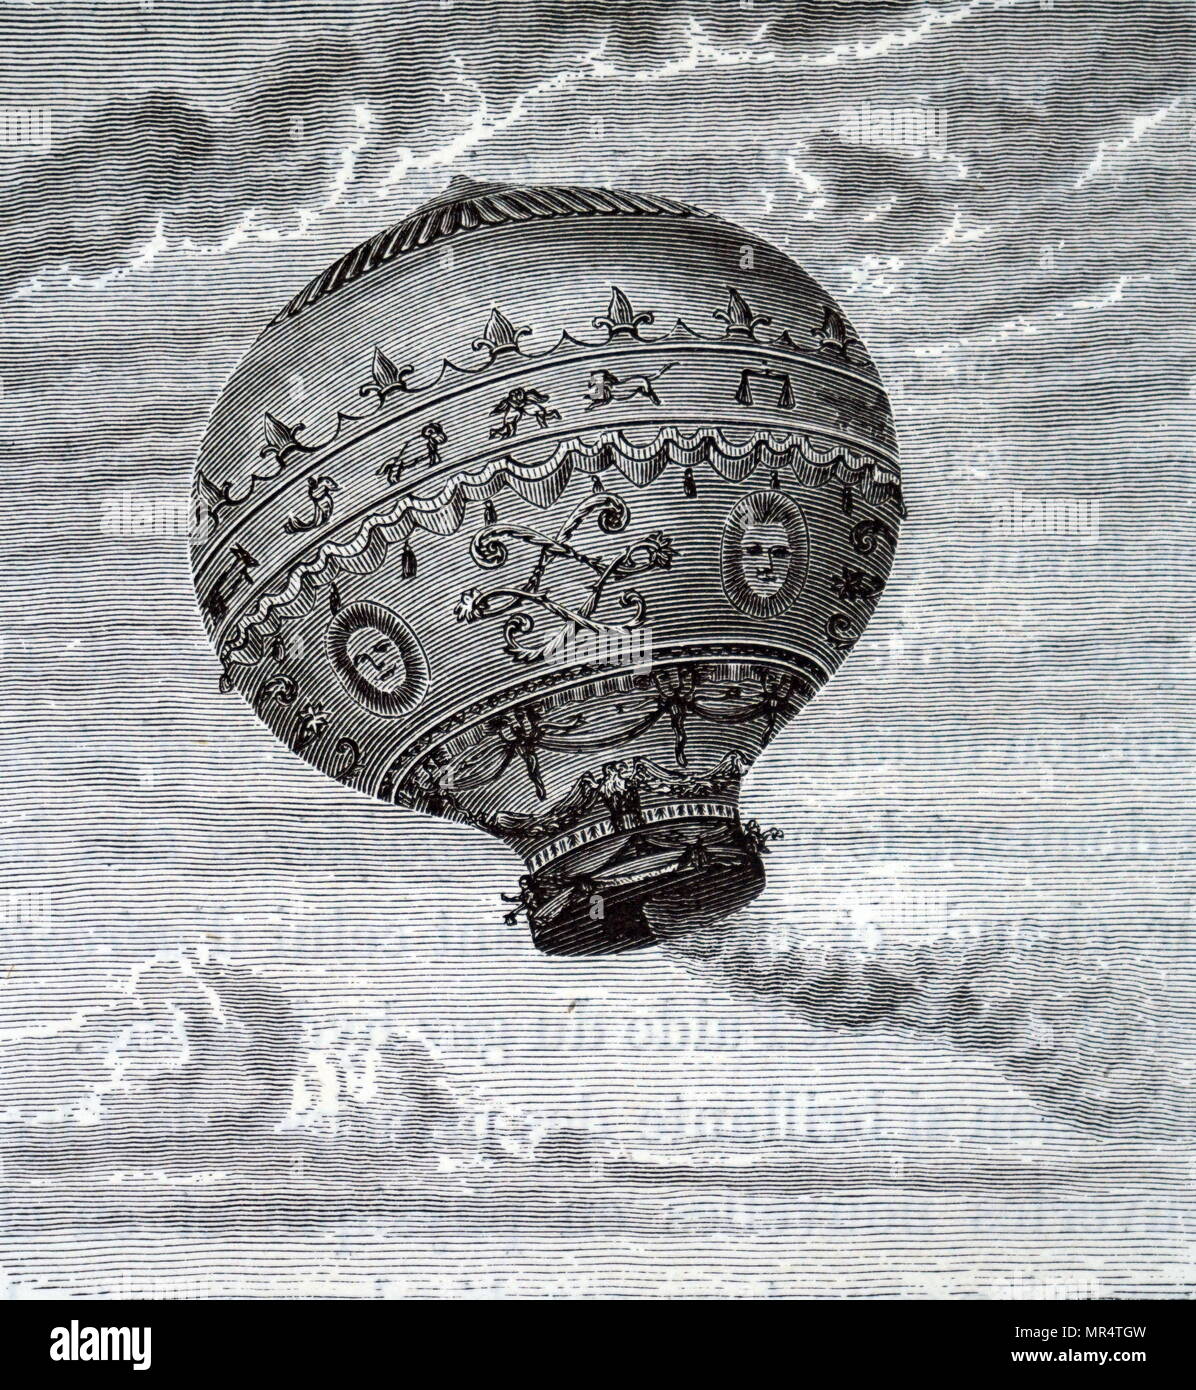 Engraving depicting François Laurent le Vieux d'Arlandes and Jean-François Pilâtre de Rozier in their Montgolfier balloon in which they made the first manned free balloon flight on 21 November 1783. François Laurent le Vieux d'Arlandes (1742-1809) was a French marquis, soldier and a pioneer of hot air ballooning. Jean-François Pilâtre de Rozier (1754-1785) was a French chemistry and physics teacher, and one of the first pioneers of aviation. Dated 18th century Stock Photo